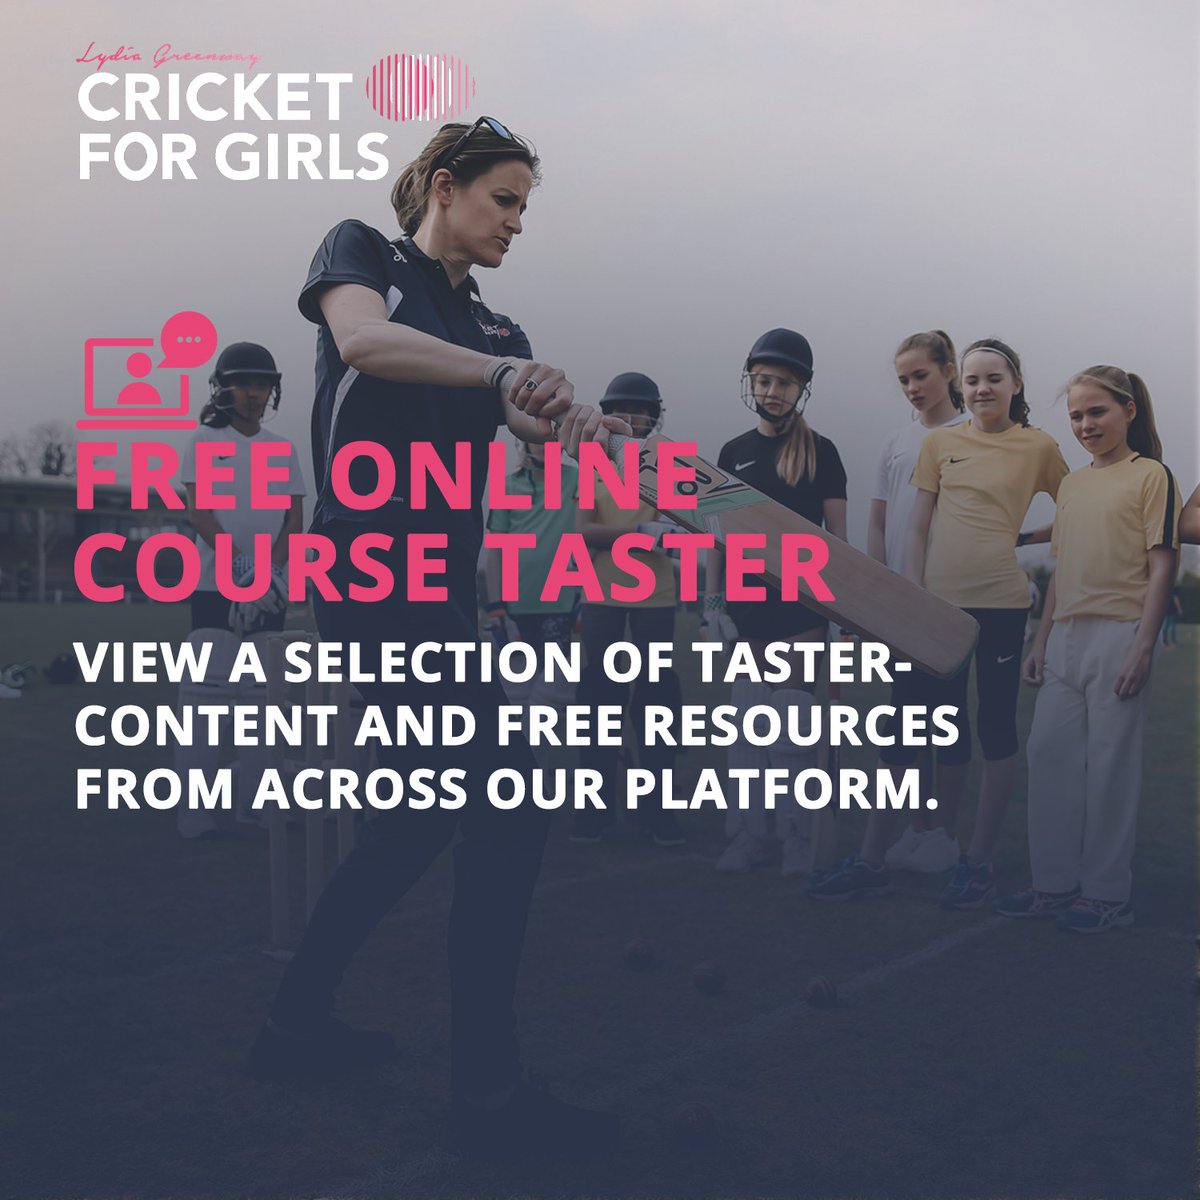 Dive into the world of cricket education with our FREE Online Course Taster! 🏏✨ Experience: ✔️ Our online course platform ✔️ Engaging video demos ✔️ Content by Lydia Greenway OBE Don't miss out! Taste the knowledge today.